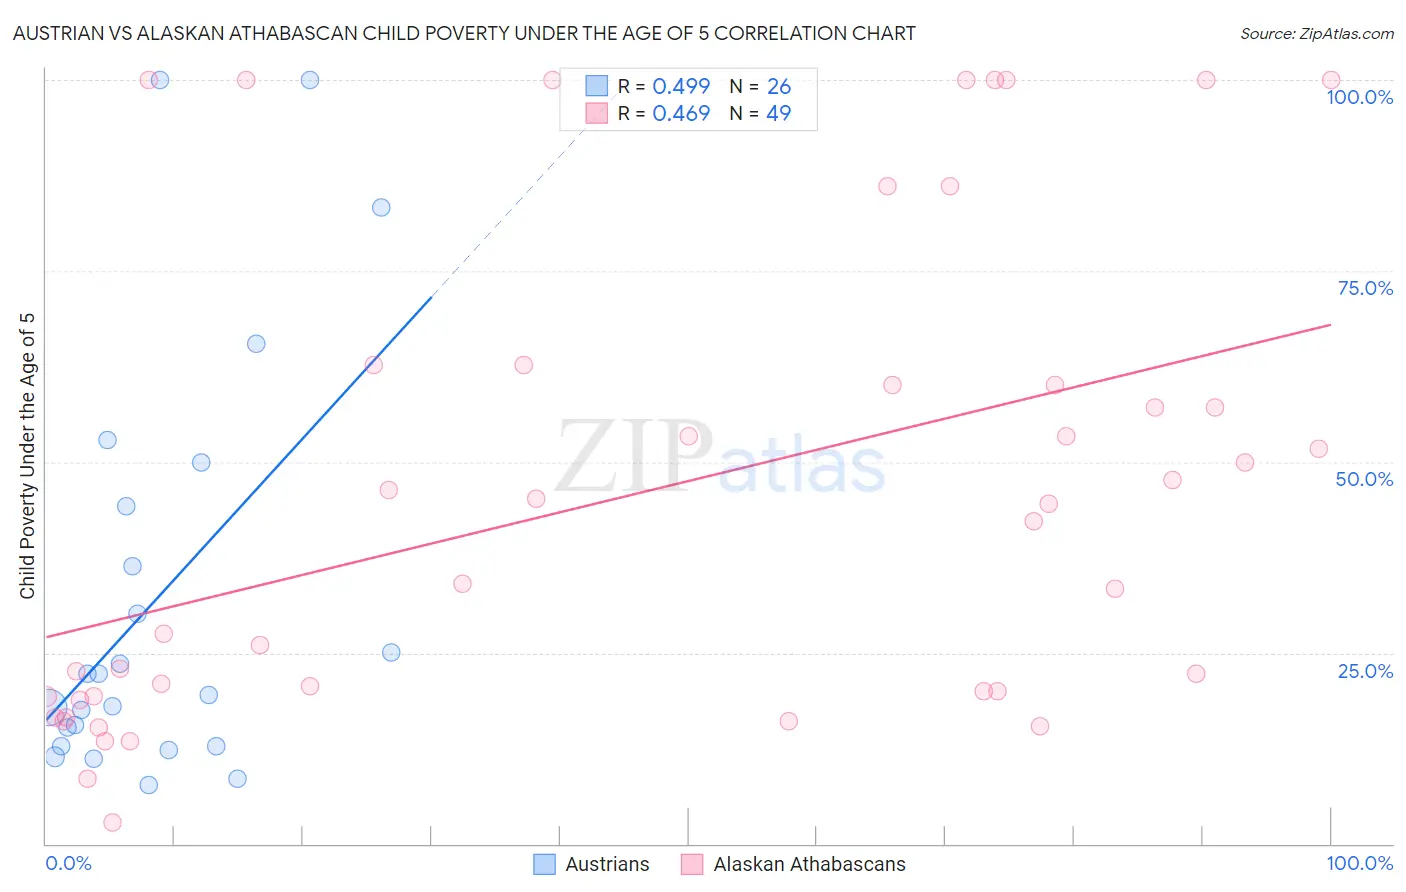 Austrian vs Alaskan Athabascan Child Poverty Under the Age of 5